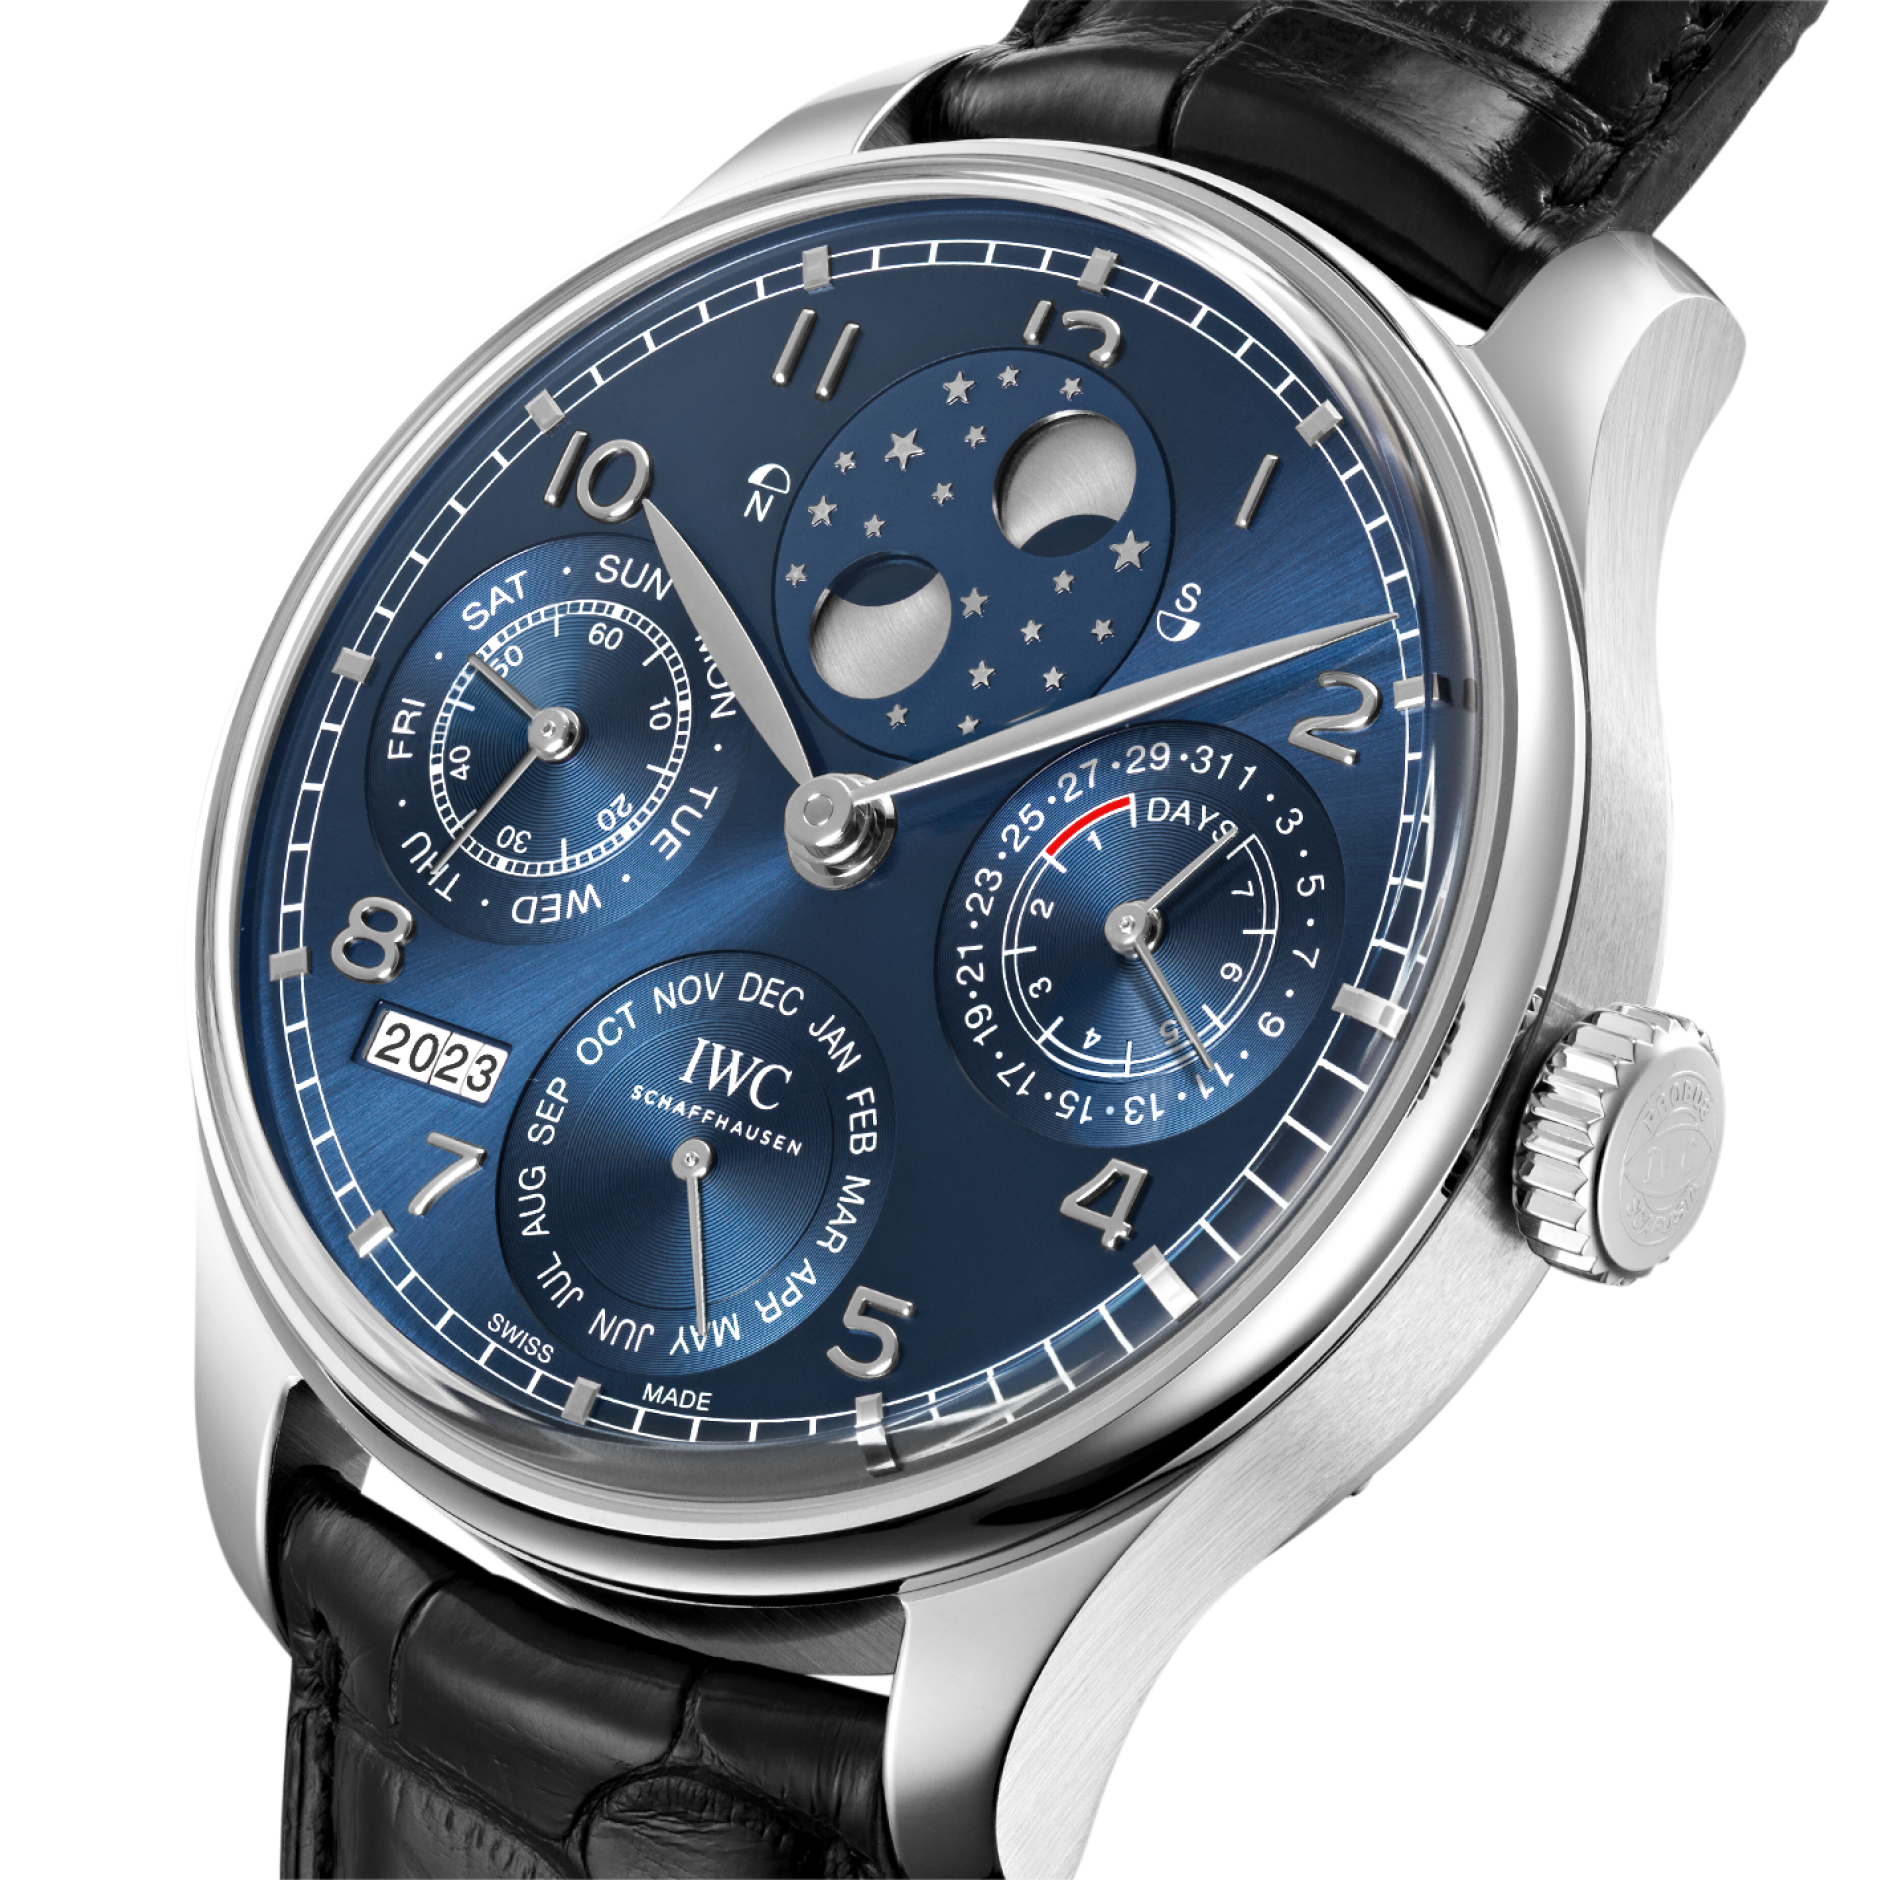 IWC Portugieser Perpetual Calendar Moonphase 44.2mm Blue 18 Ct White Gold Case